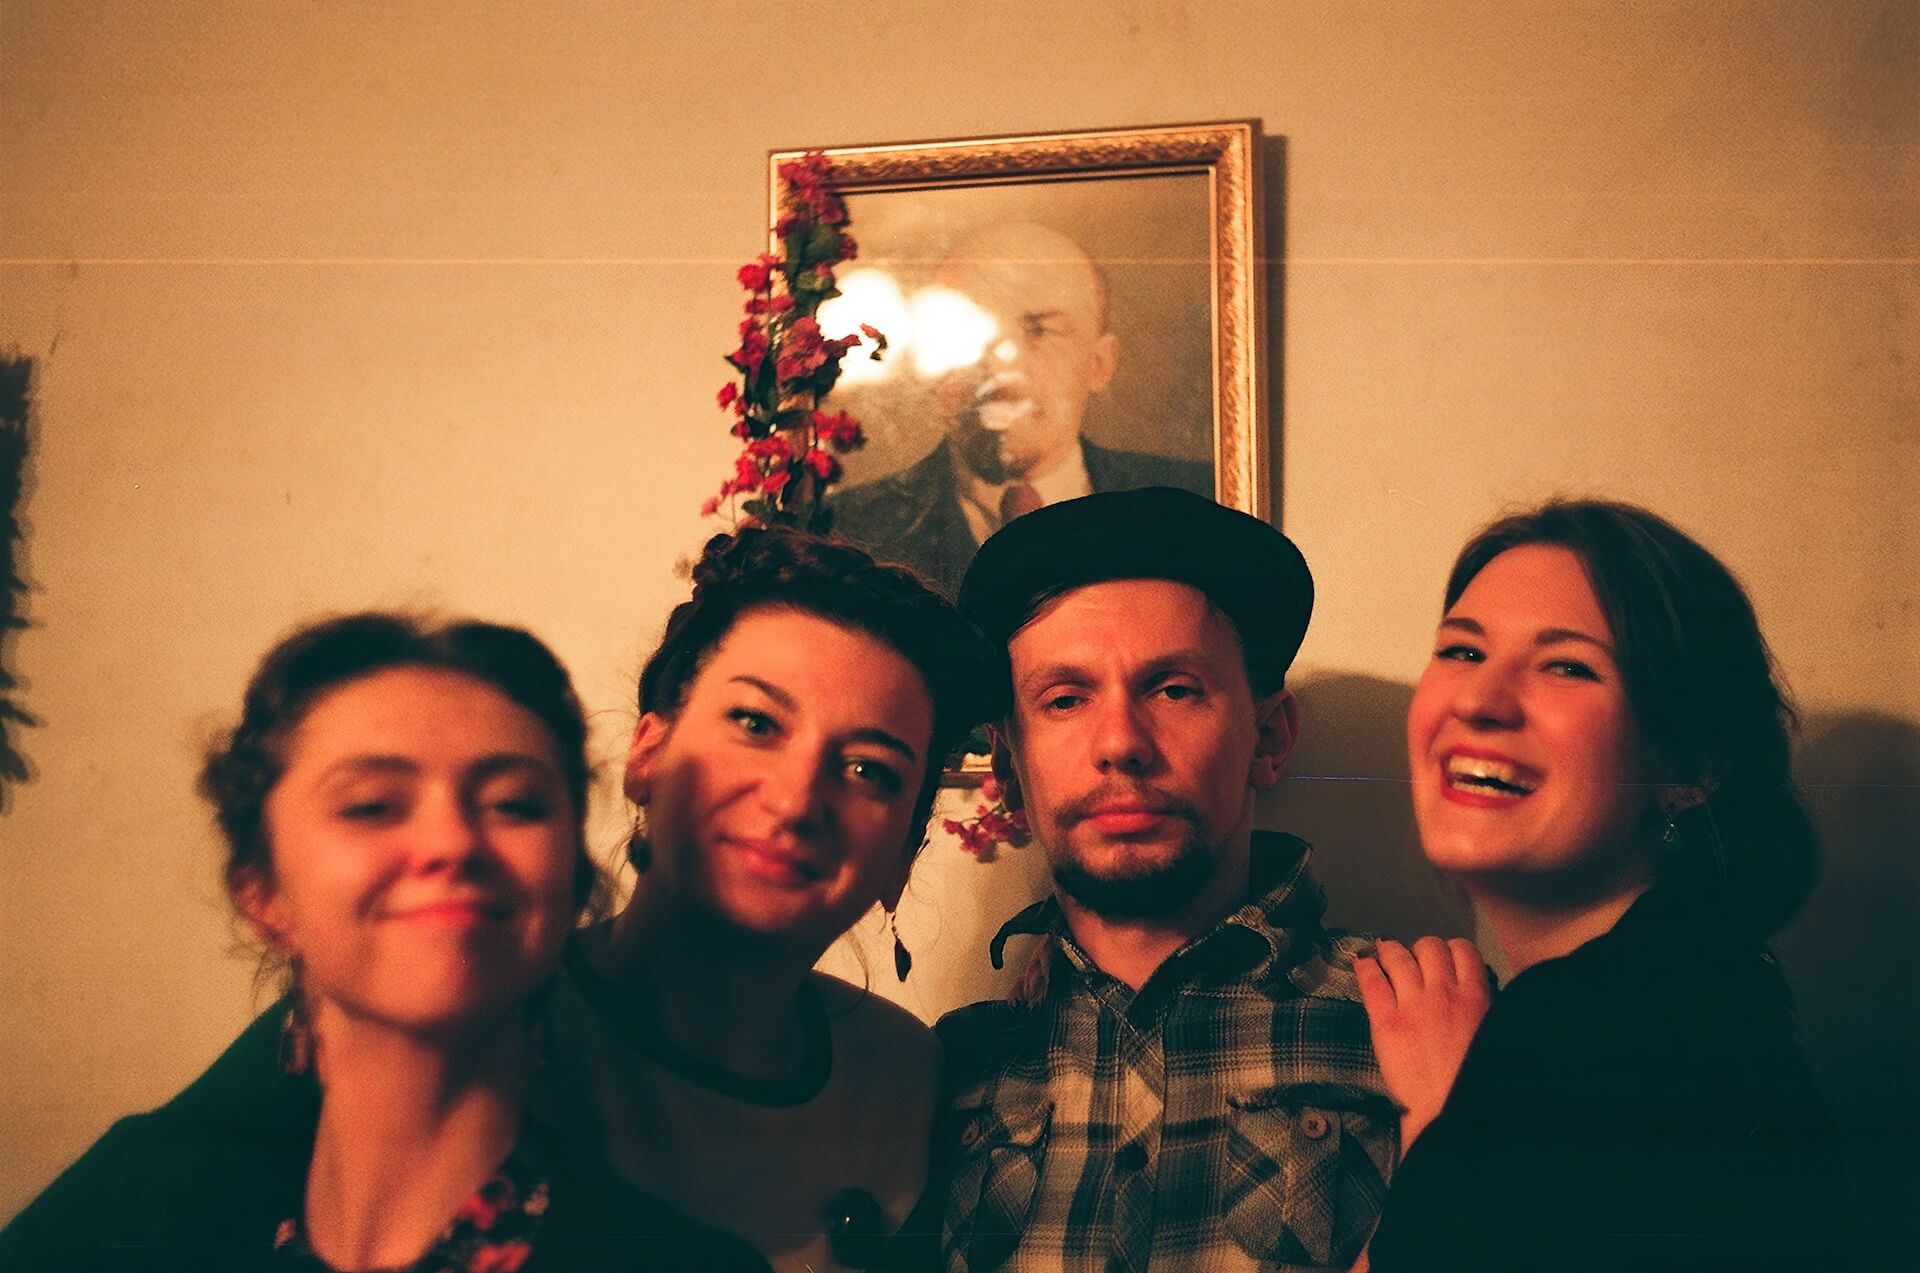 Four people are posing for photo in front of a portrait decorated with flowers. Everyone is smiling except one who looks unamused.